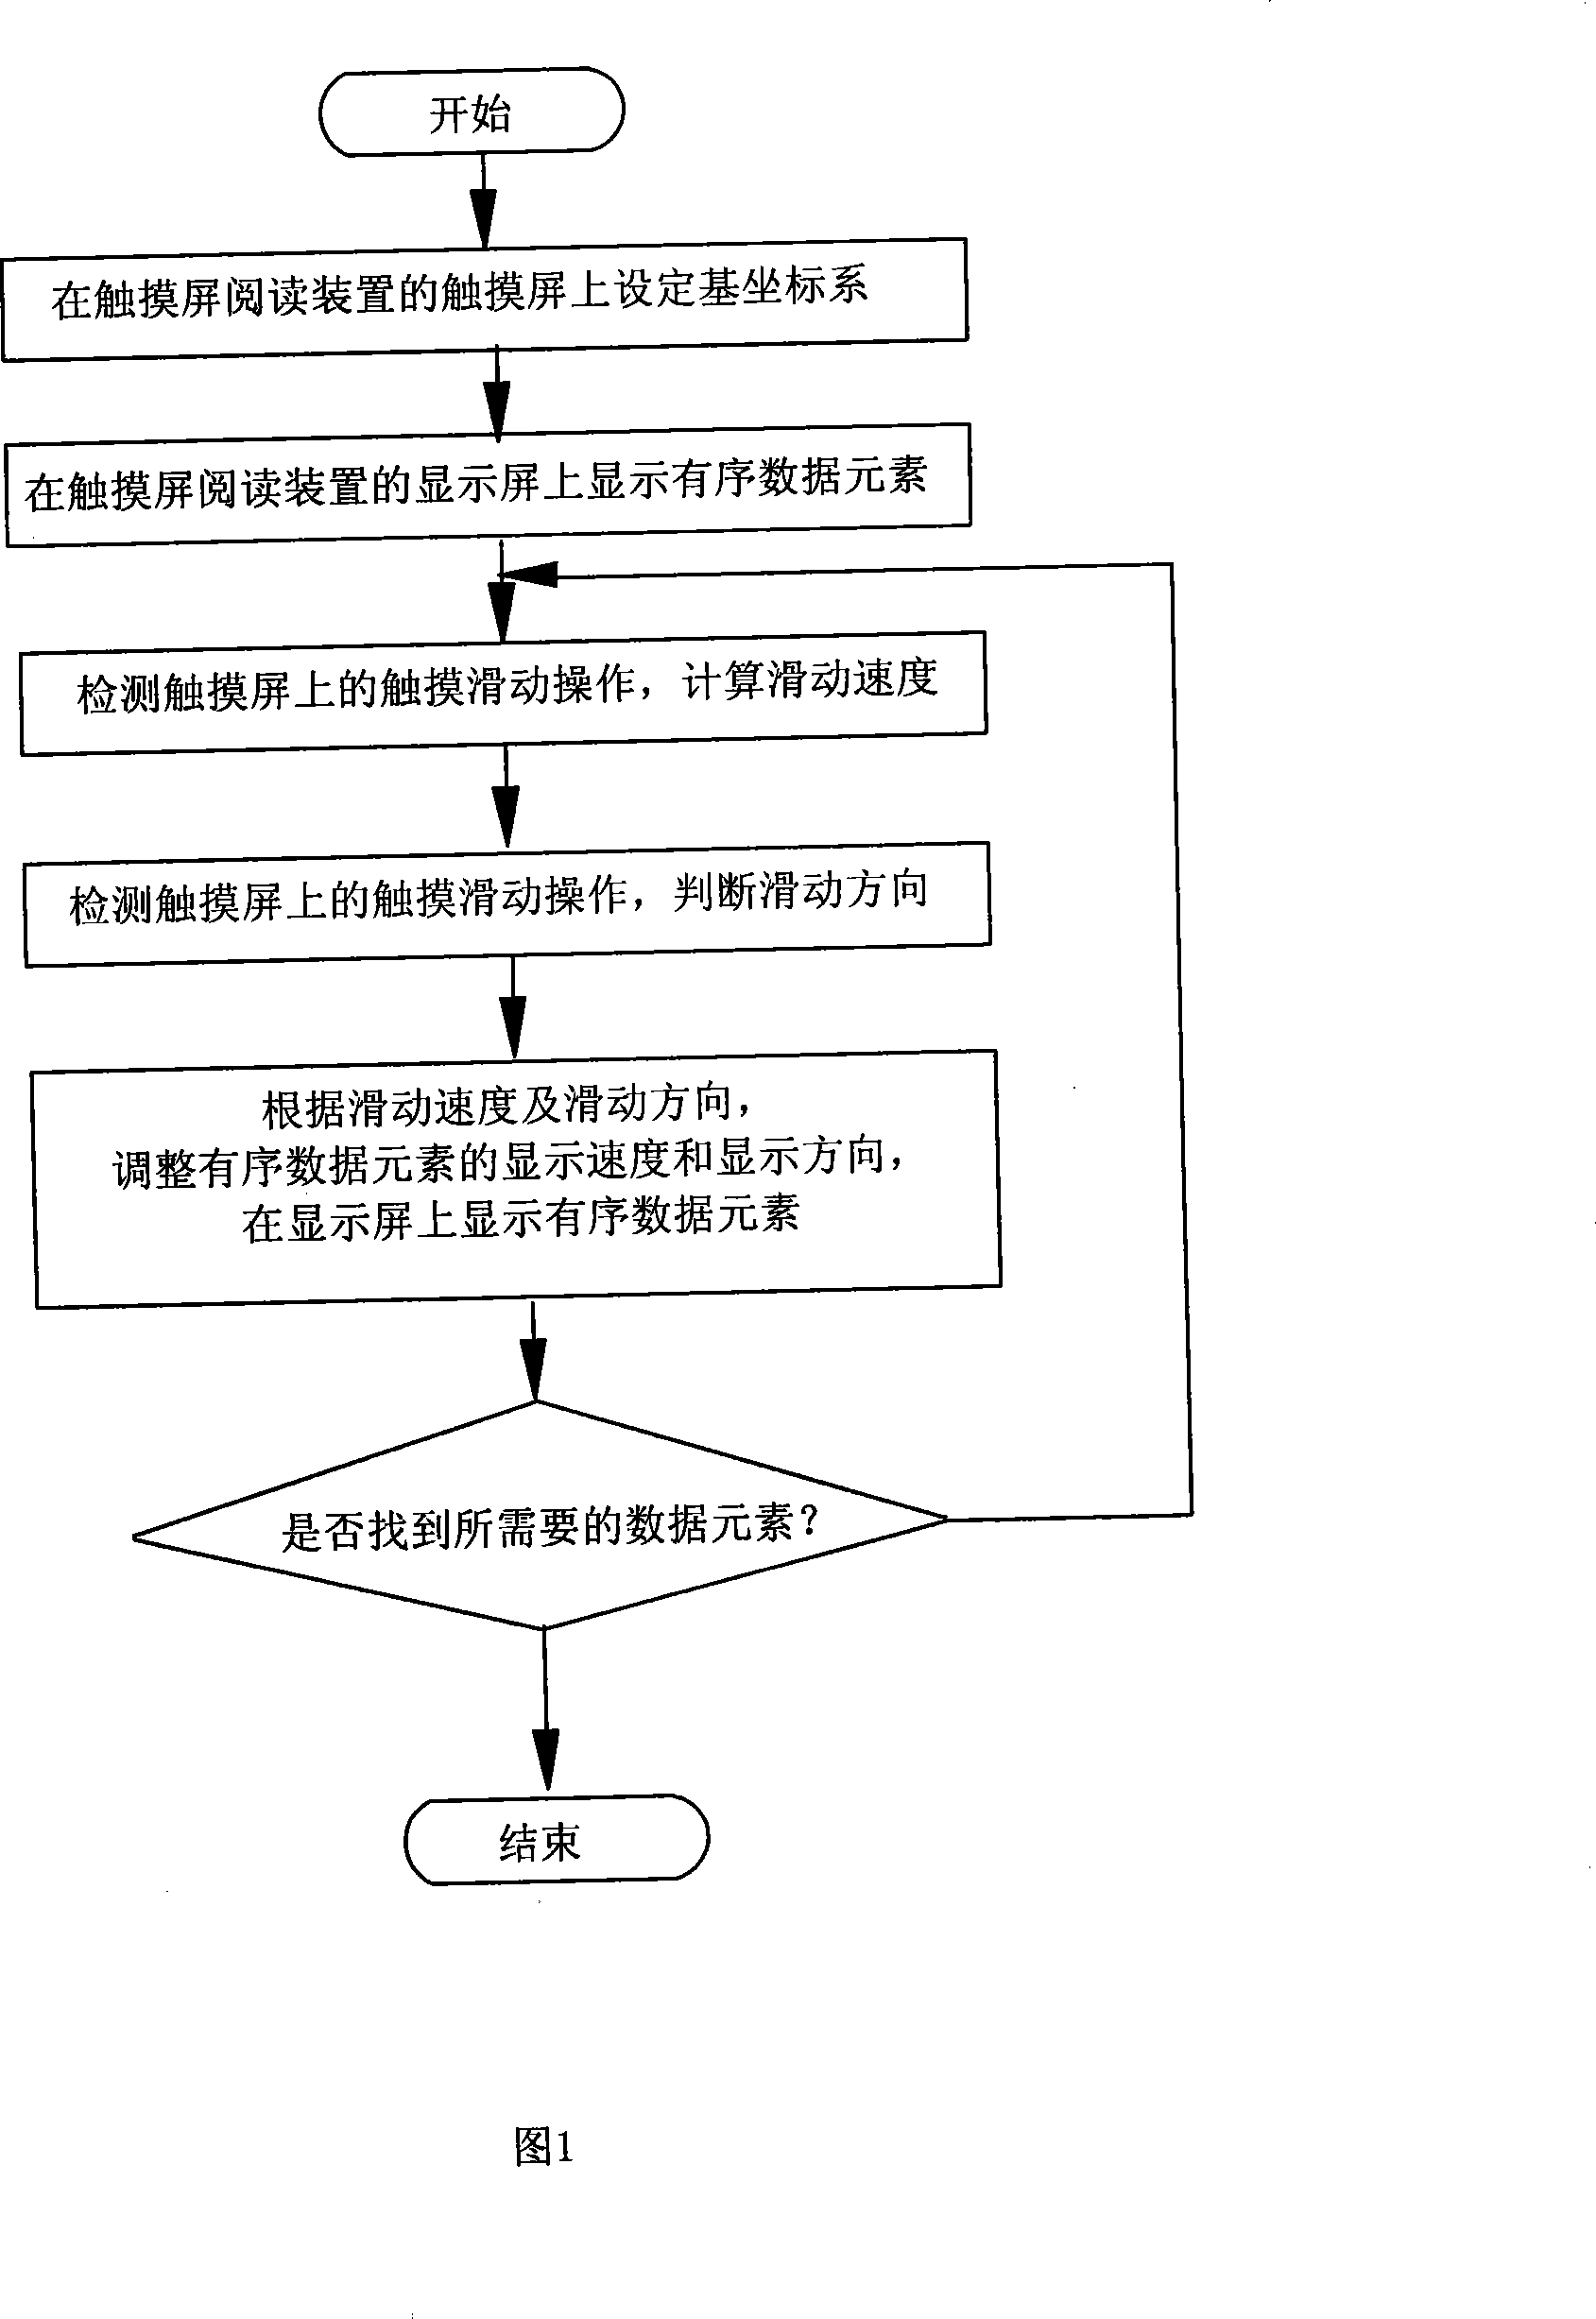 Rotary type continuously speed changing browsing and search method based on touch screen